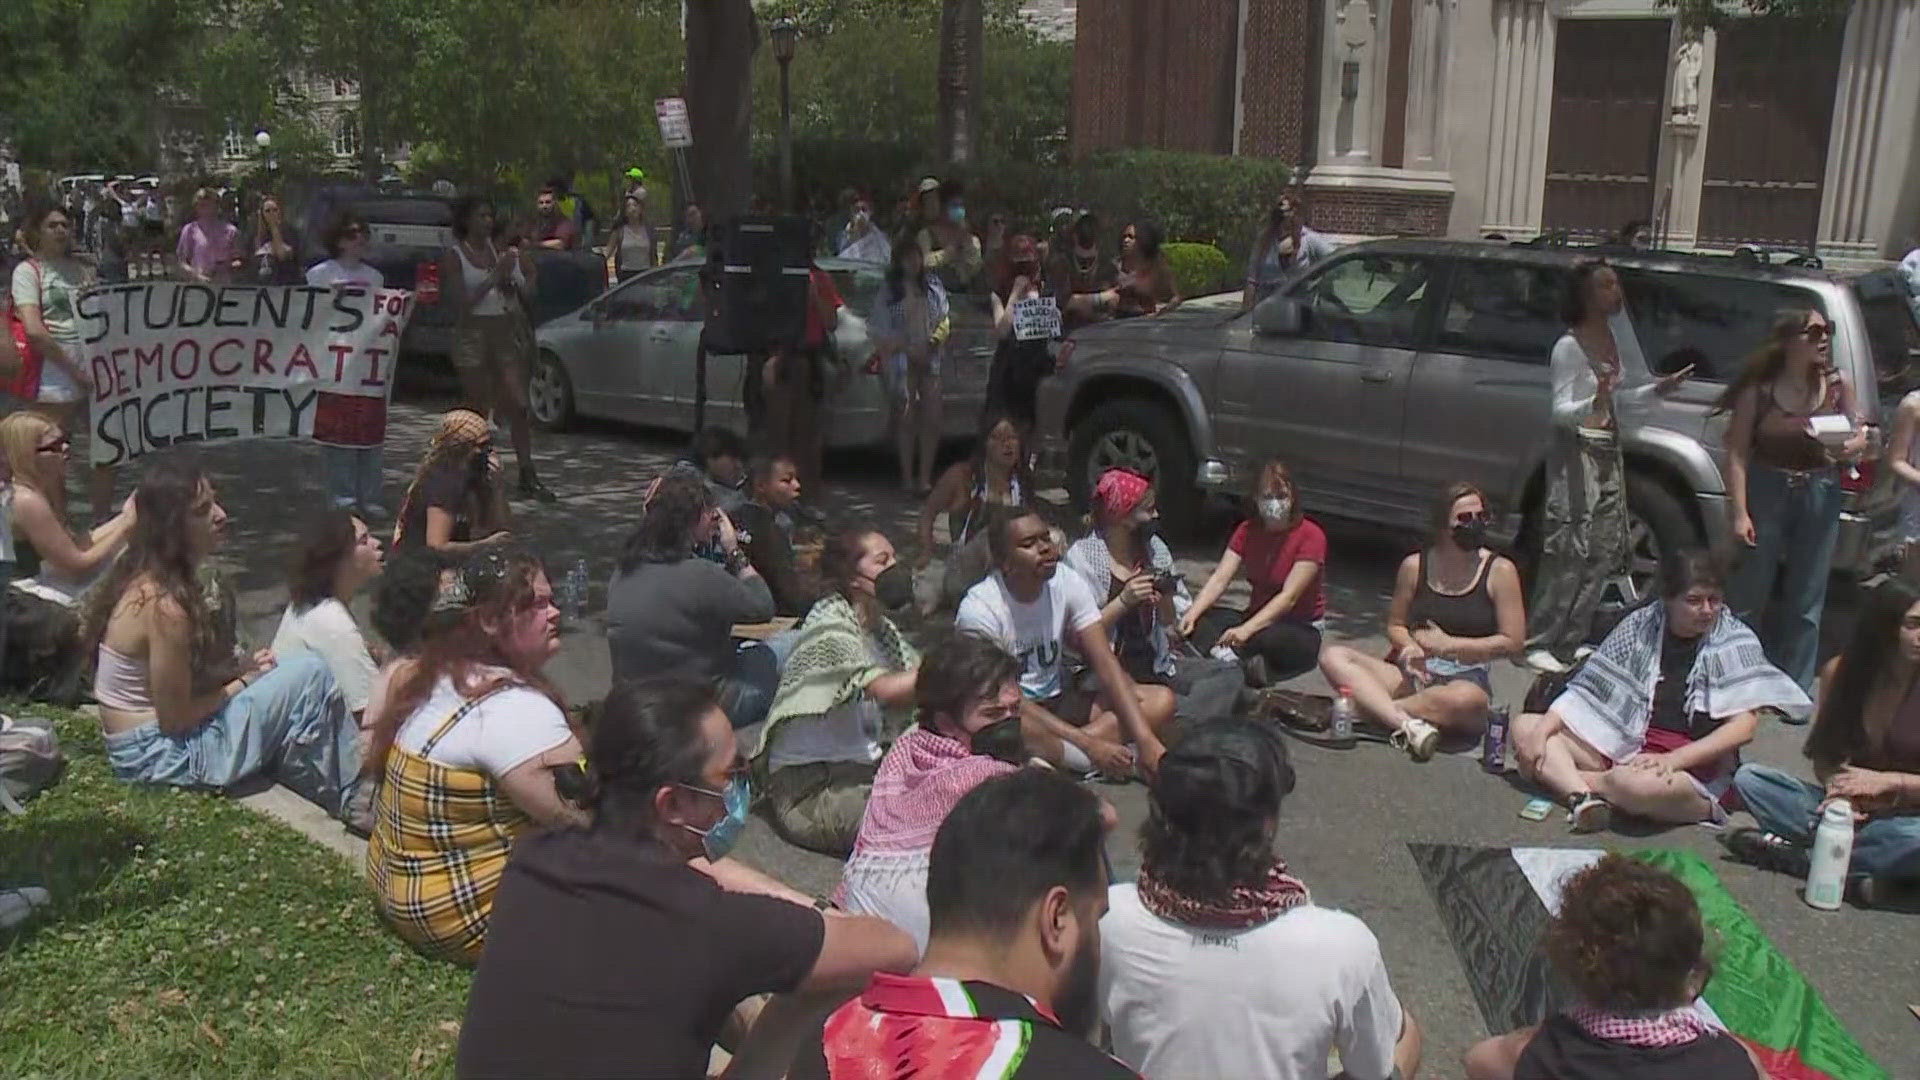 What appeared to be a crowd of more than 100 protesters blocked St. Charles Avenue near the campuses Friday afternoon.